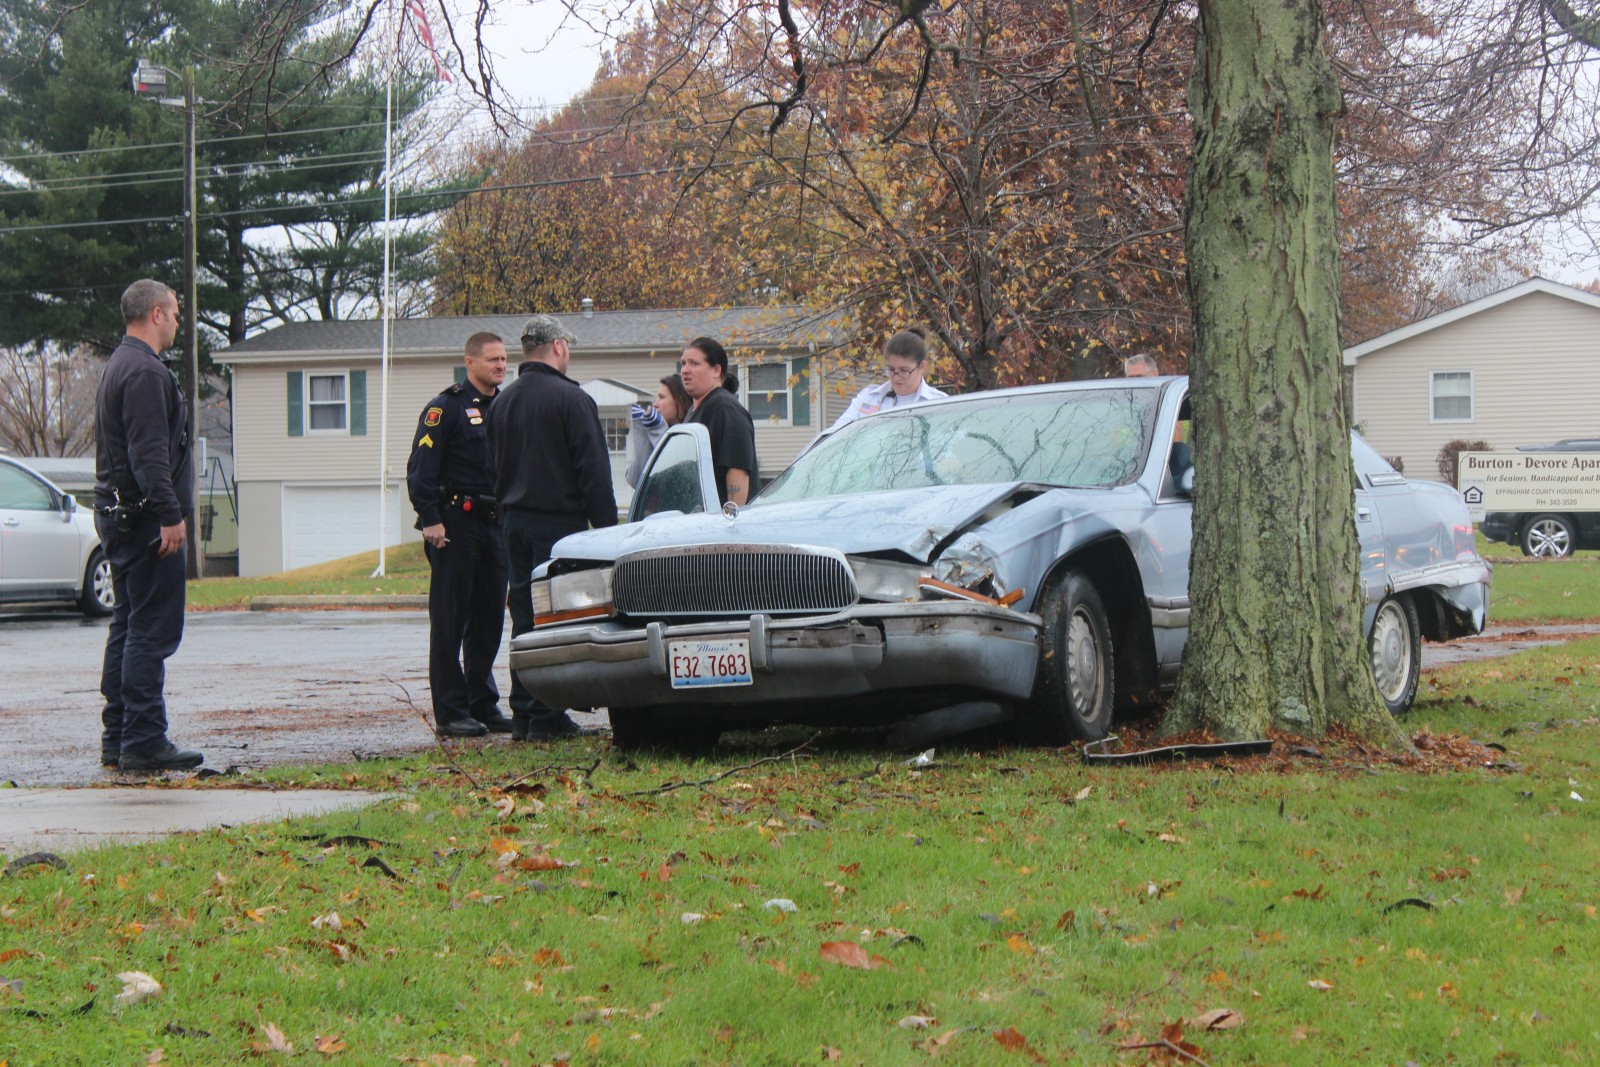 Paramedics and Police inspect a vehicle that collided with a tree on Temple Avenue.